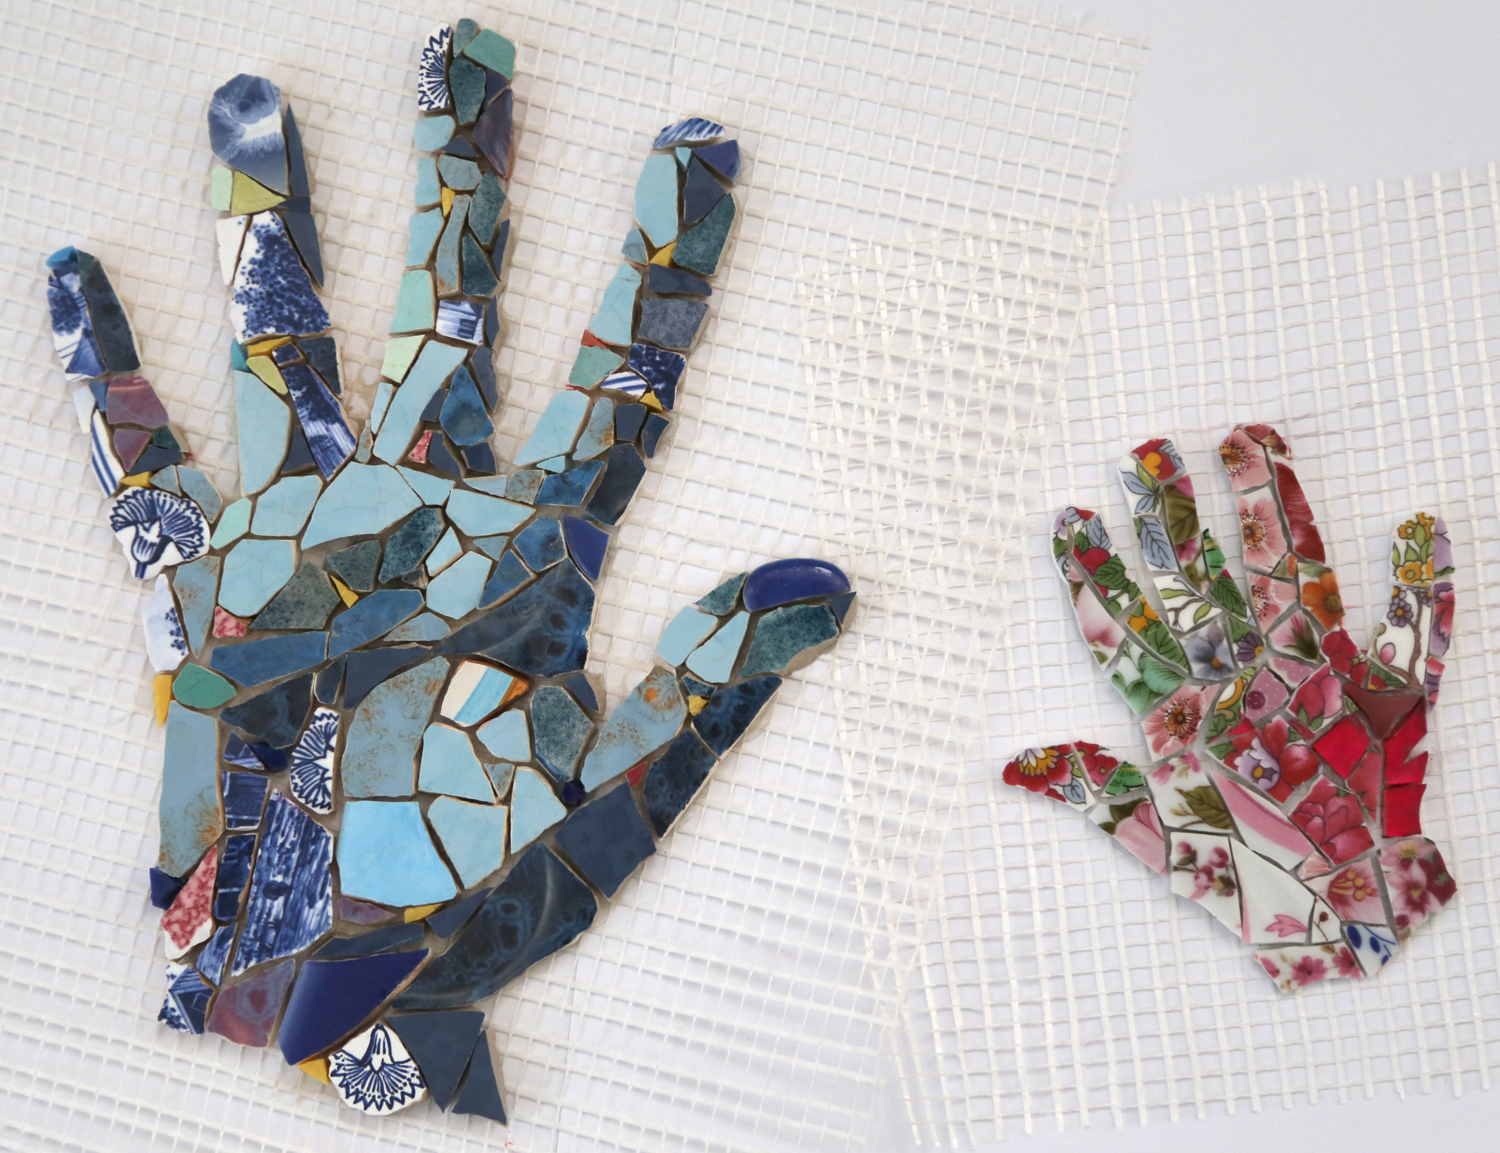 Mosaic hands for trencadisbcn and conin, Barcelona